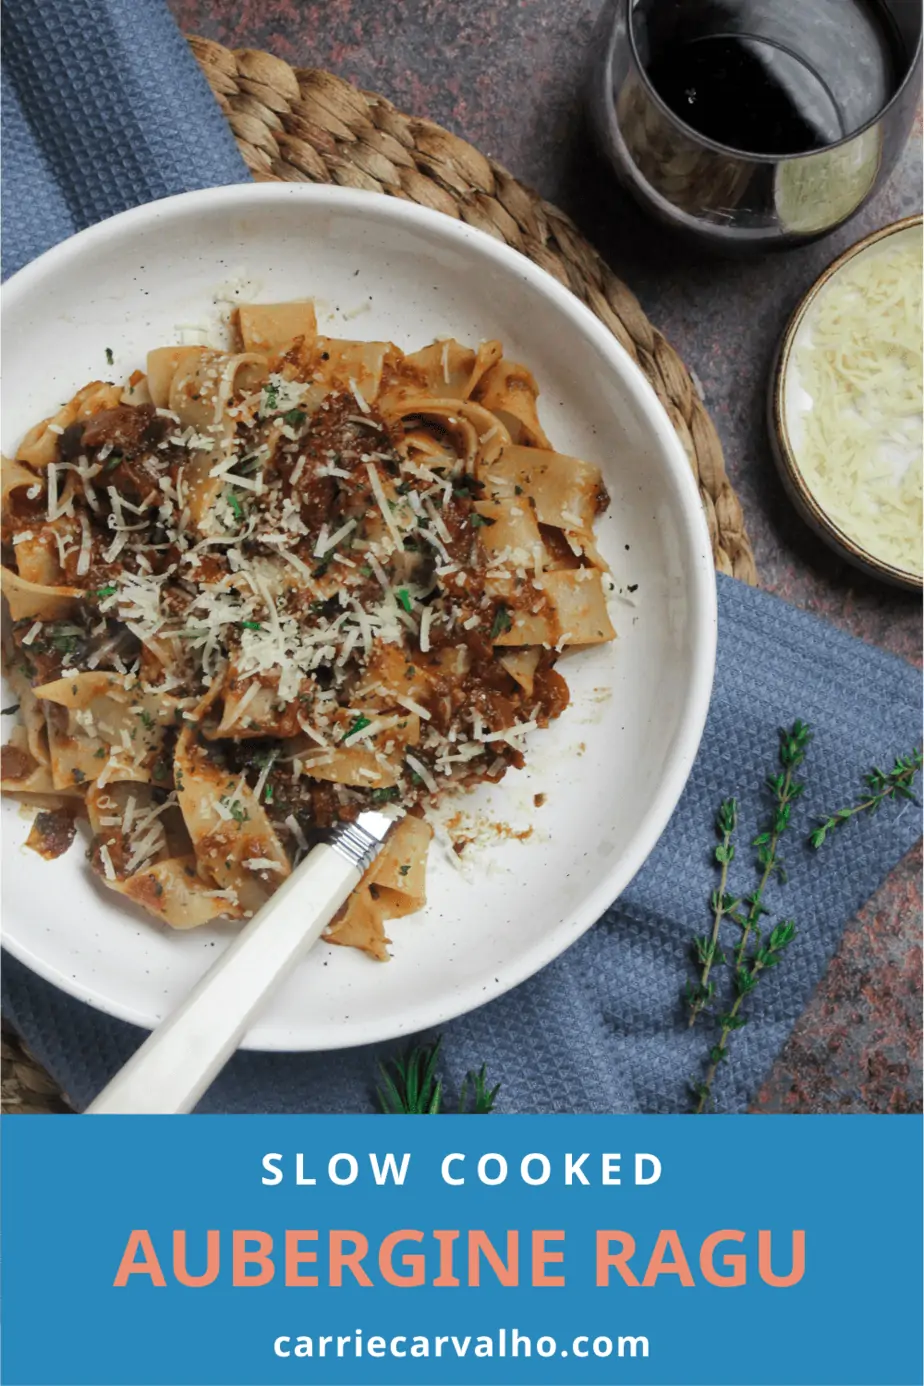 Slow Cooked Aubergine Ragu with Pappardelle